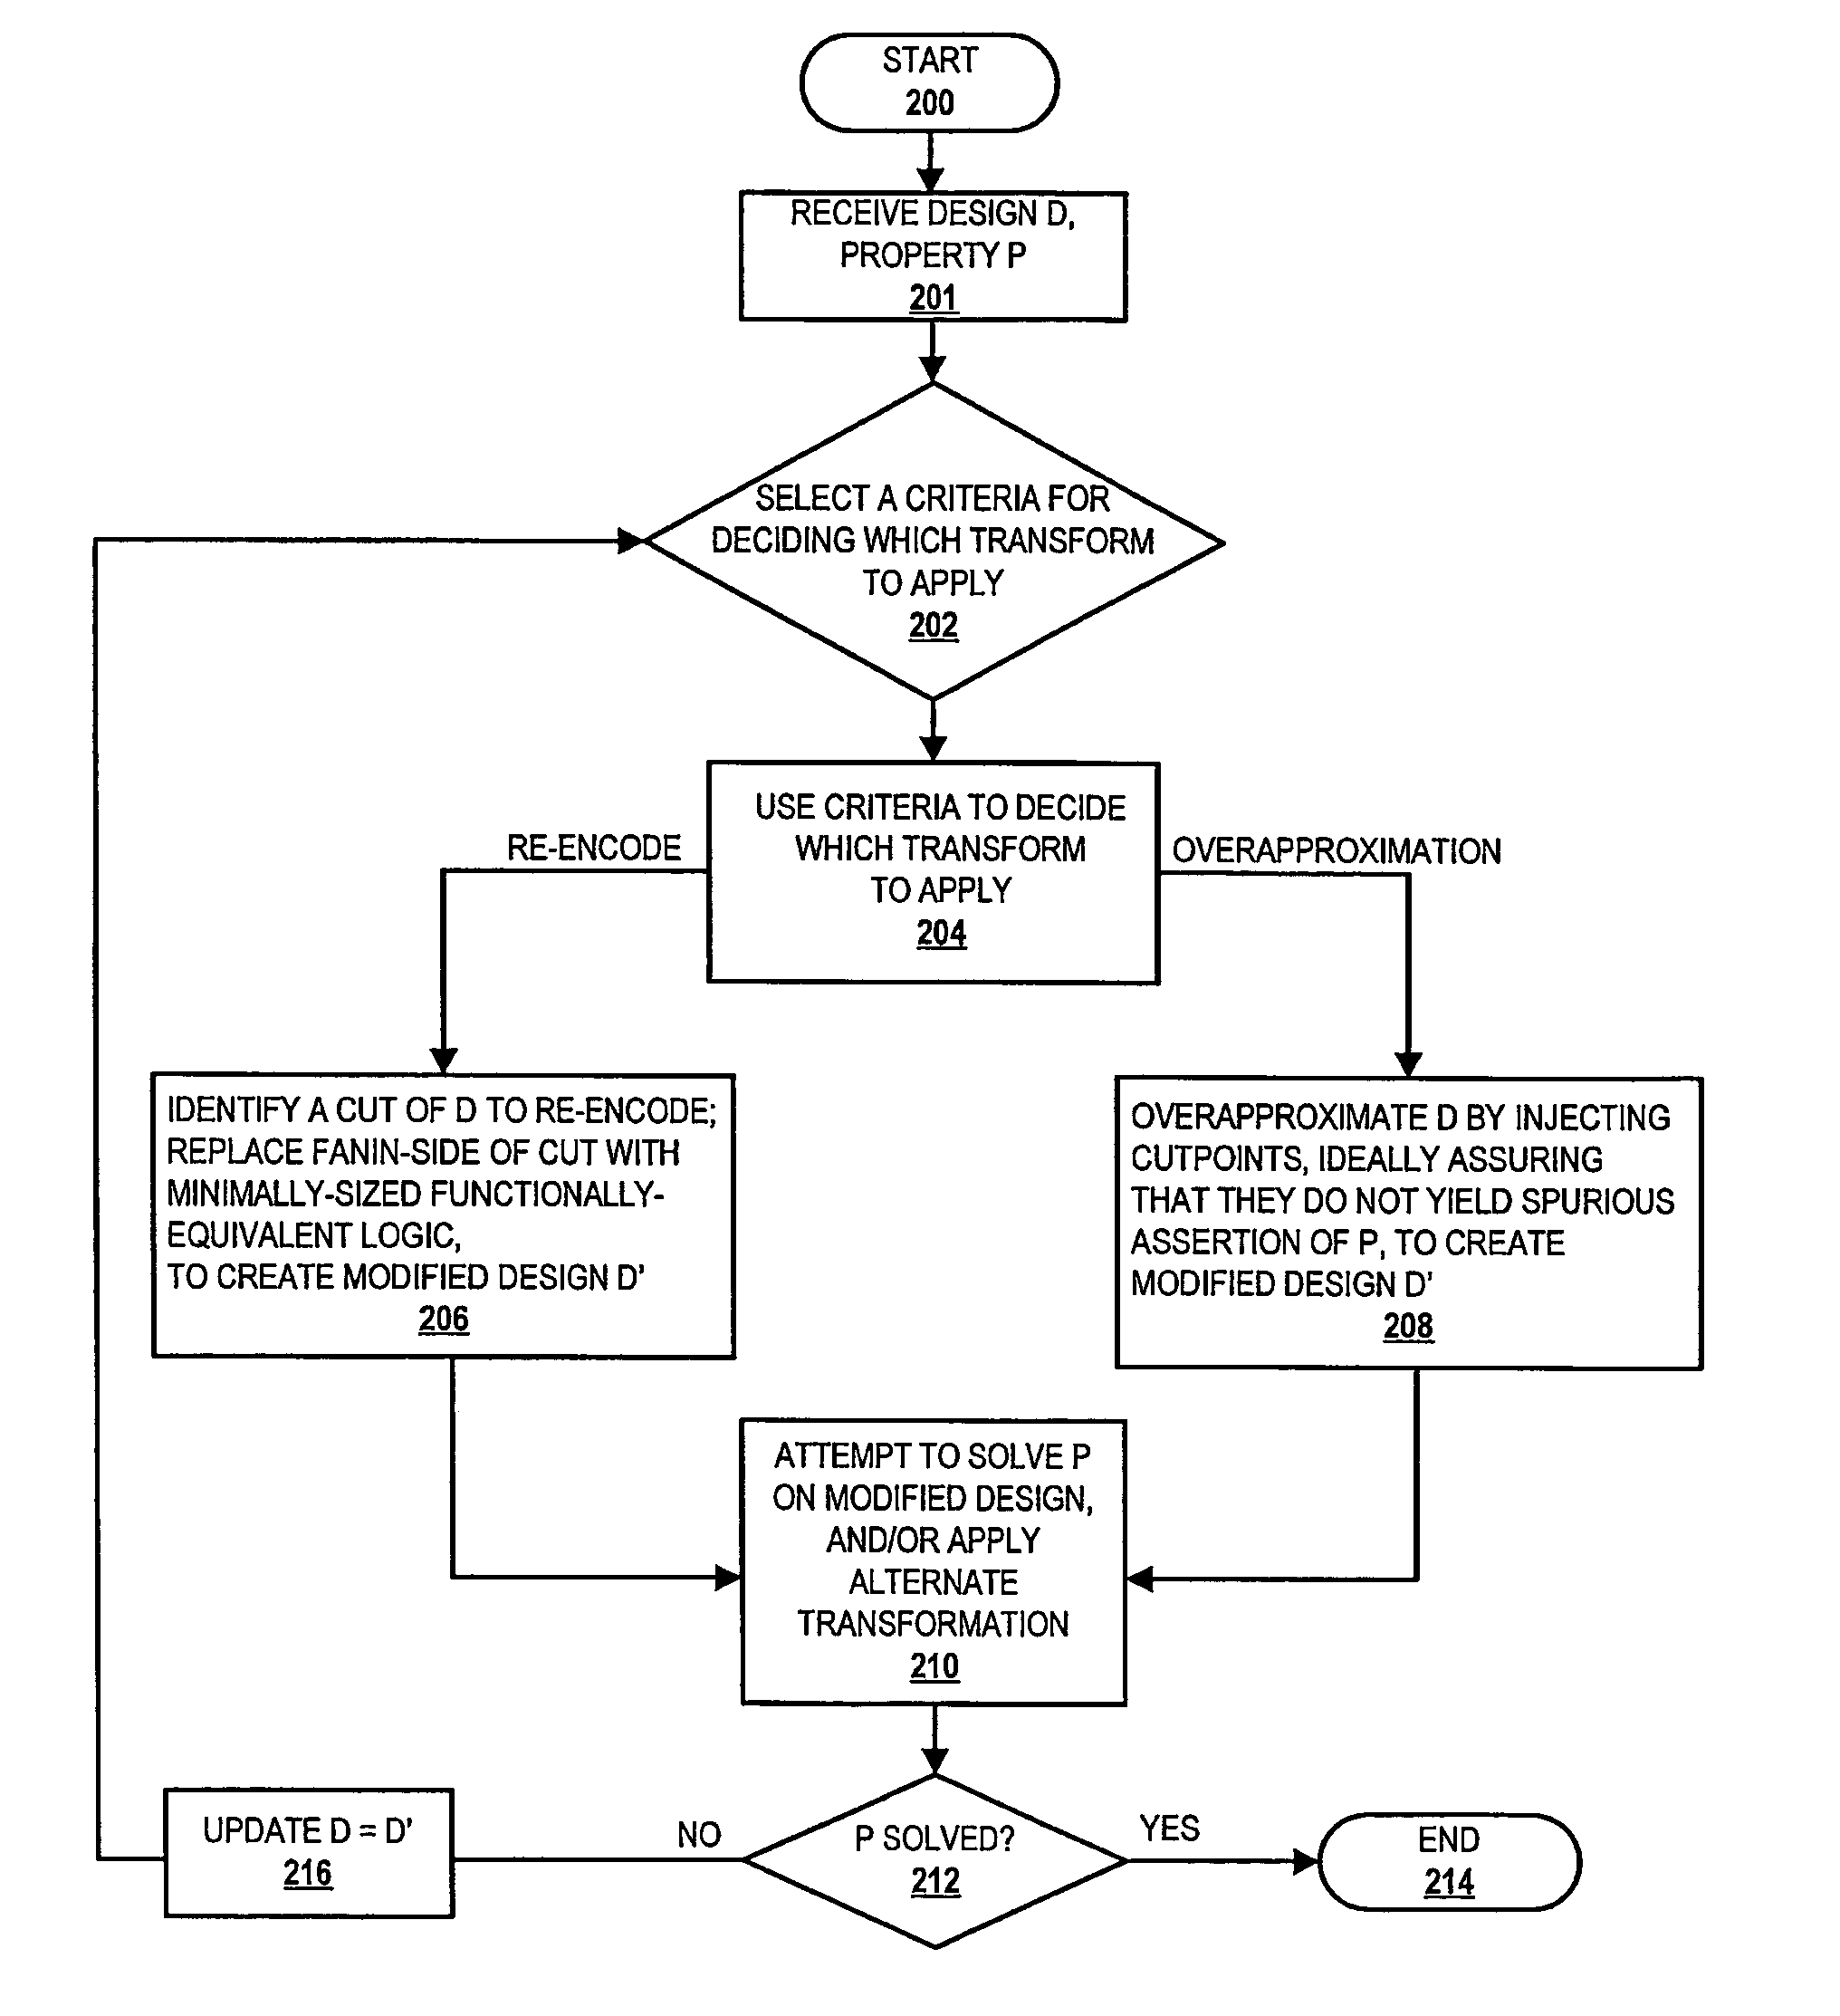 Method for incremental design reduction via iterative overapproximation and re-encoding strategies